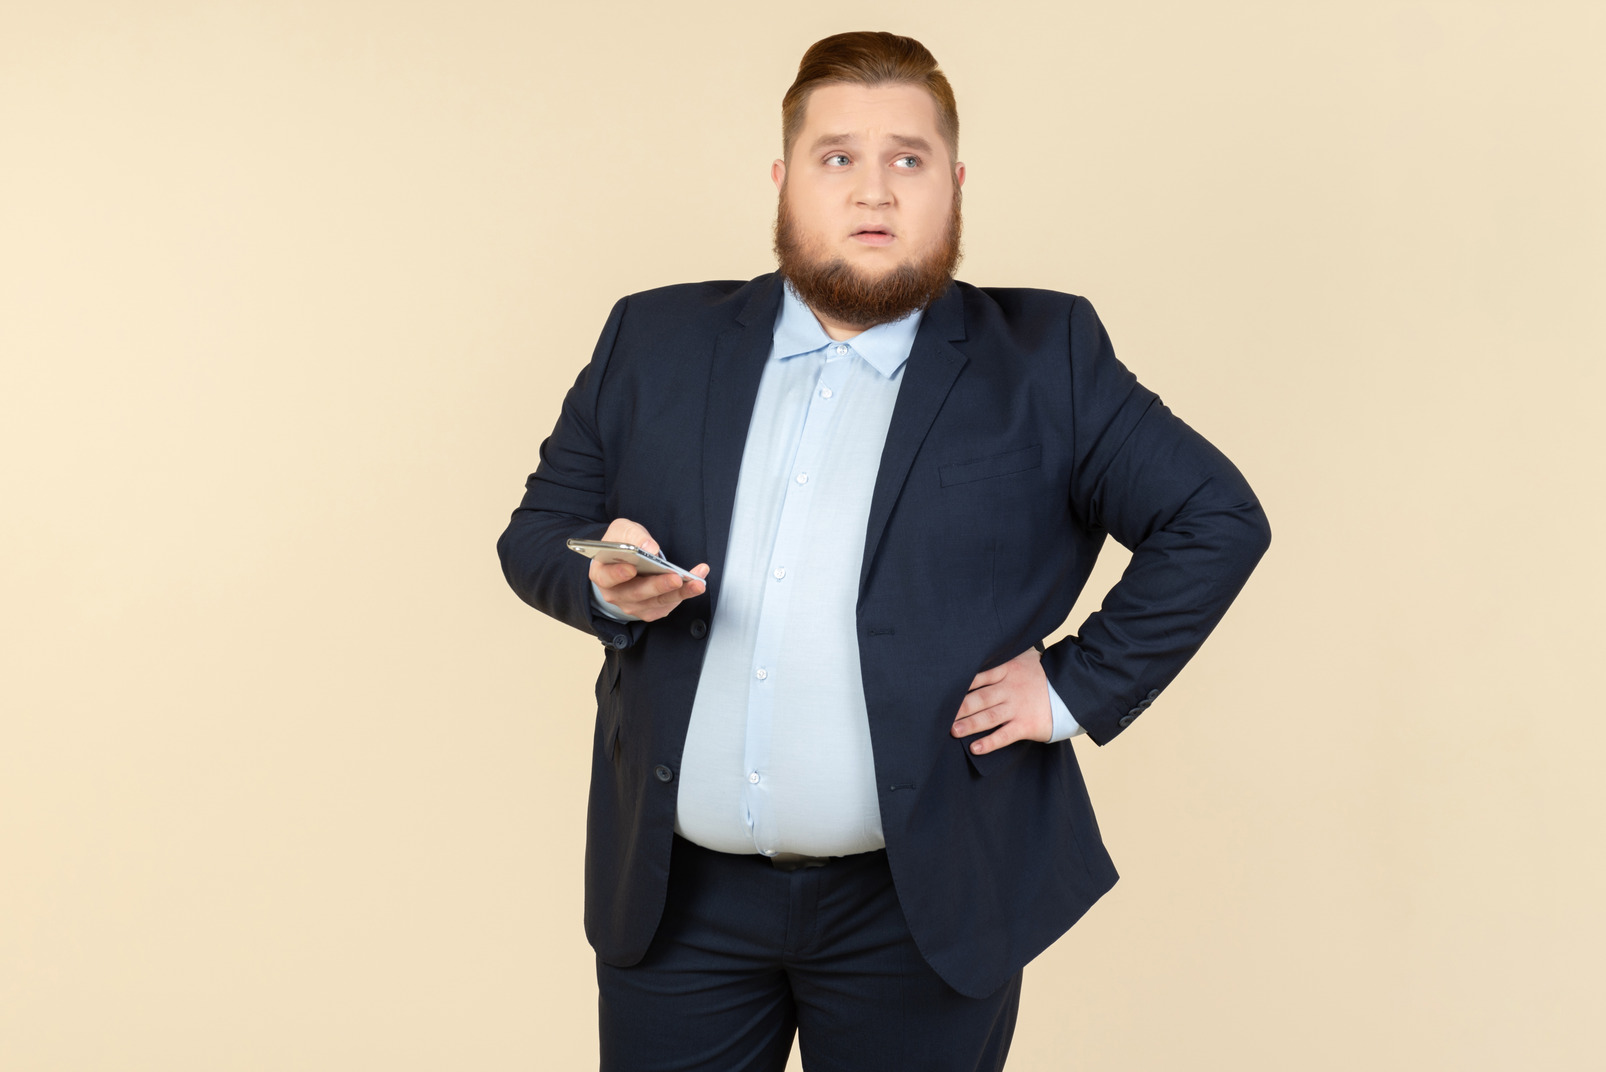 Pensive young overweight office worker holding phone